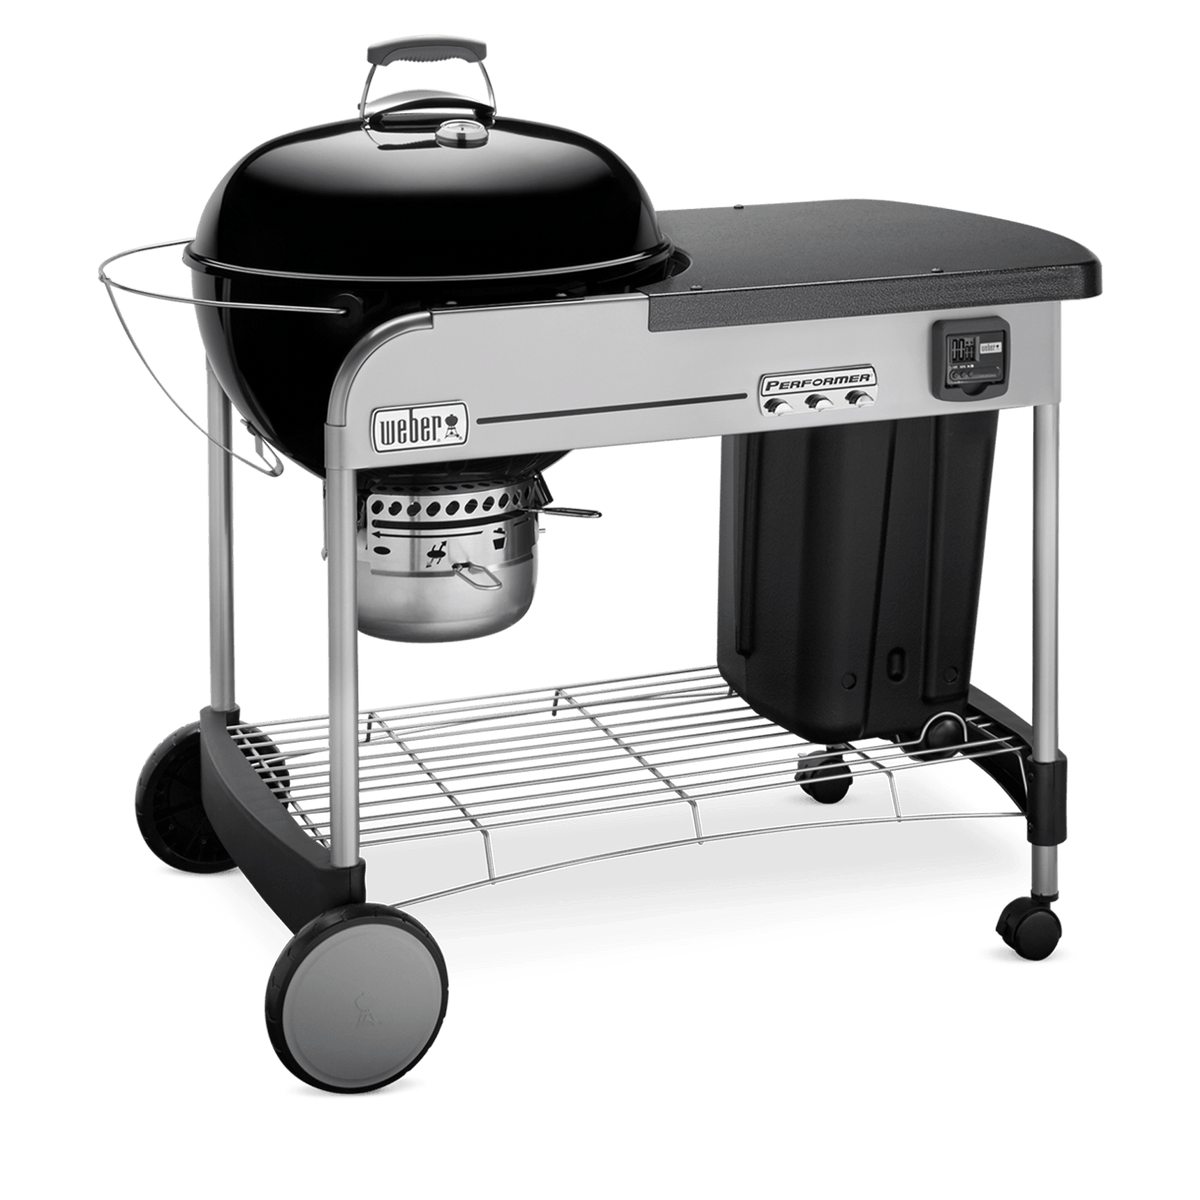 Performer Premium Charcoal Grill 22"